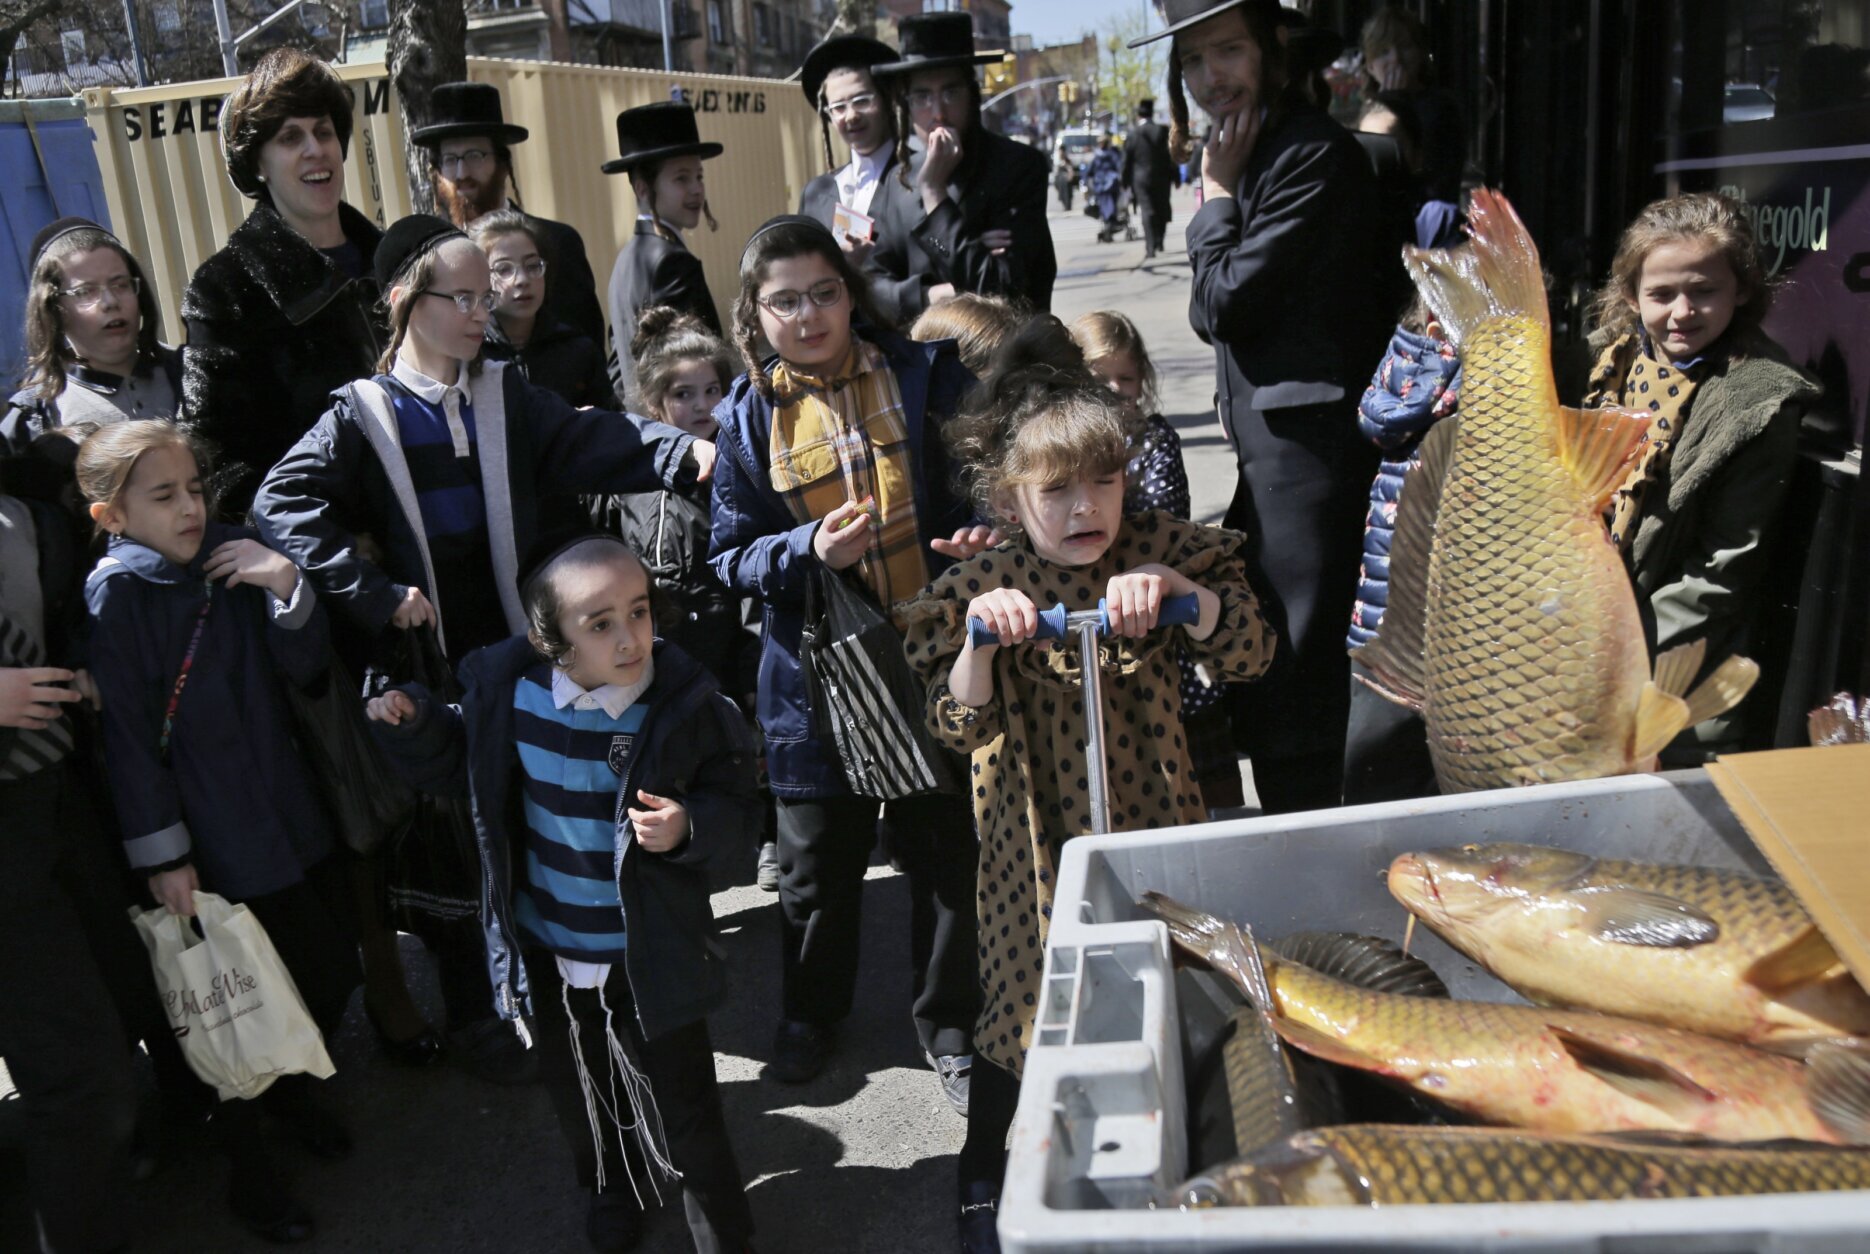 FILE - A group of orthodox Jews react as a carp flops out of its crate during a delivery to Taubers Fish in the Williamsburg section of Brooklyn, New York, Wednesday, April 17, 2019. This year, in a rare convergence, Judaism’s Passover, Christianity’s Easter and Islam’s holy month of Ramadan are interlapping in April with holy days for Buddhists, Baha’is, Sikhs, Jains and Hindus, offering different faith groups a chance to share meals and rituals in a range of interfaith events. (AP Photo/Seth Wenig, File)